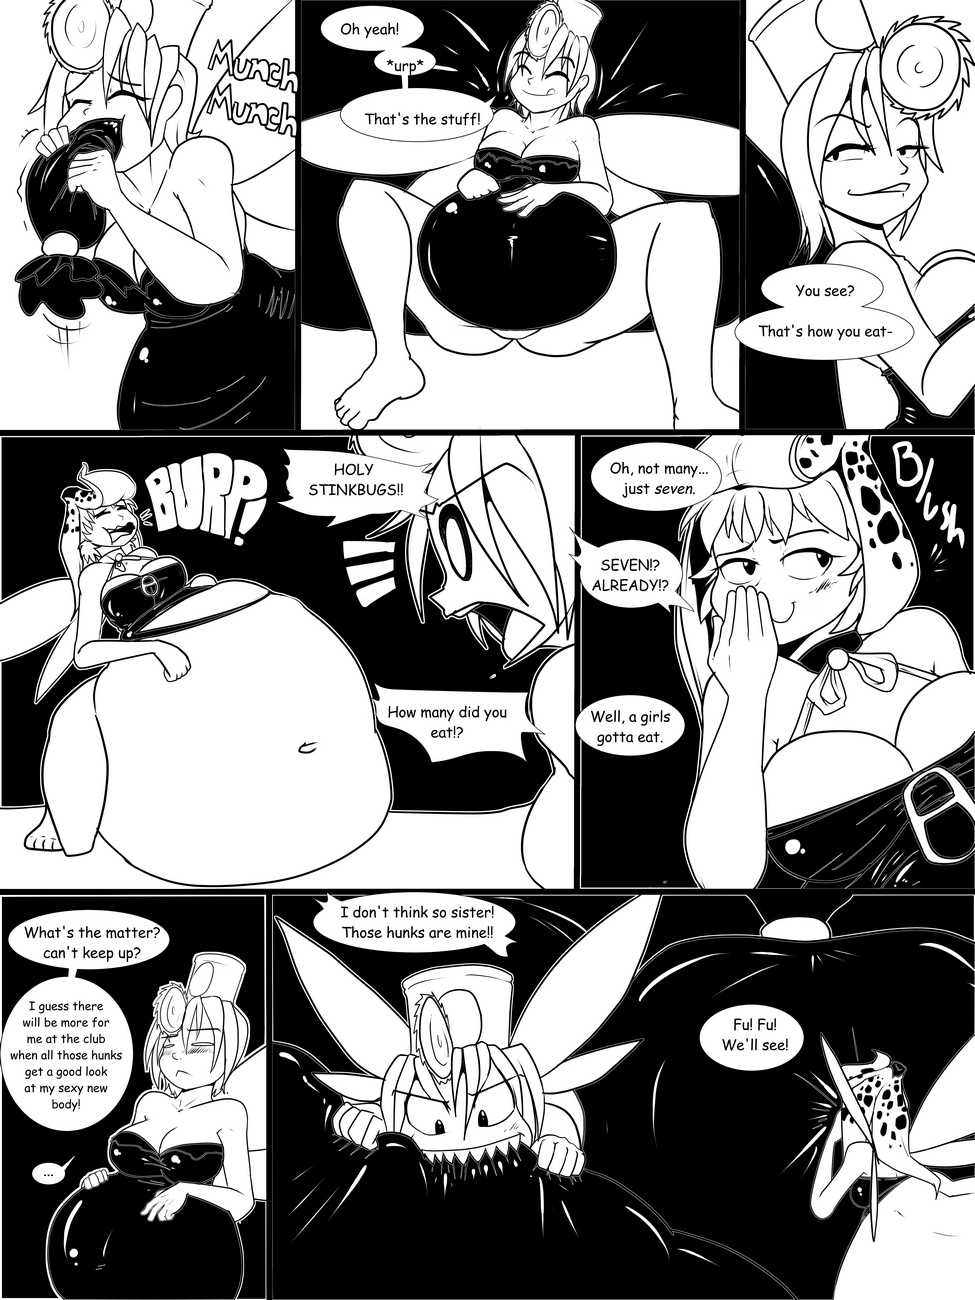 Girls Night Out page 4